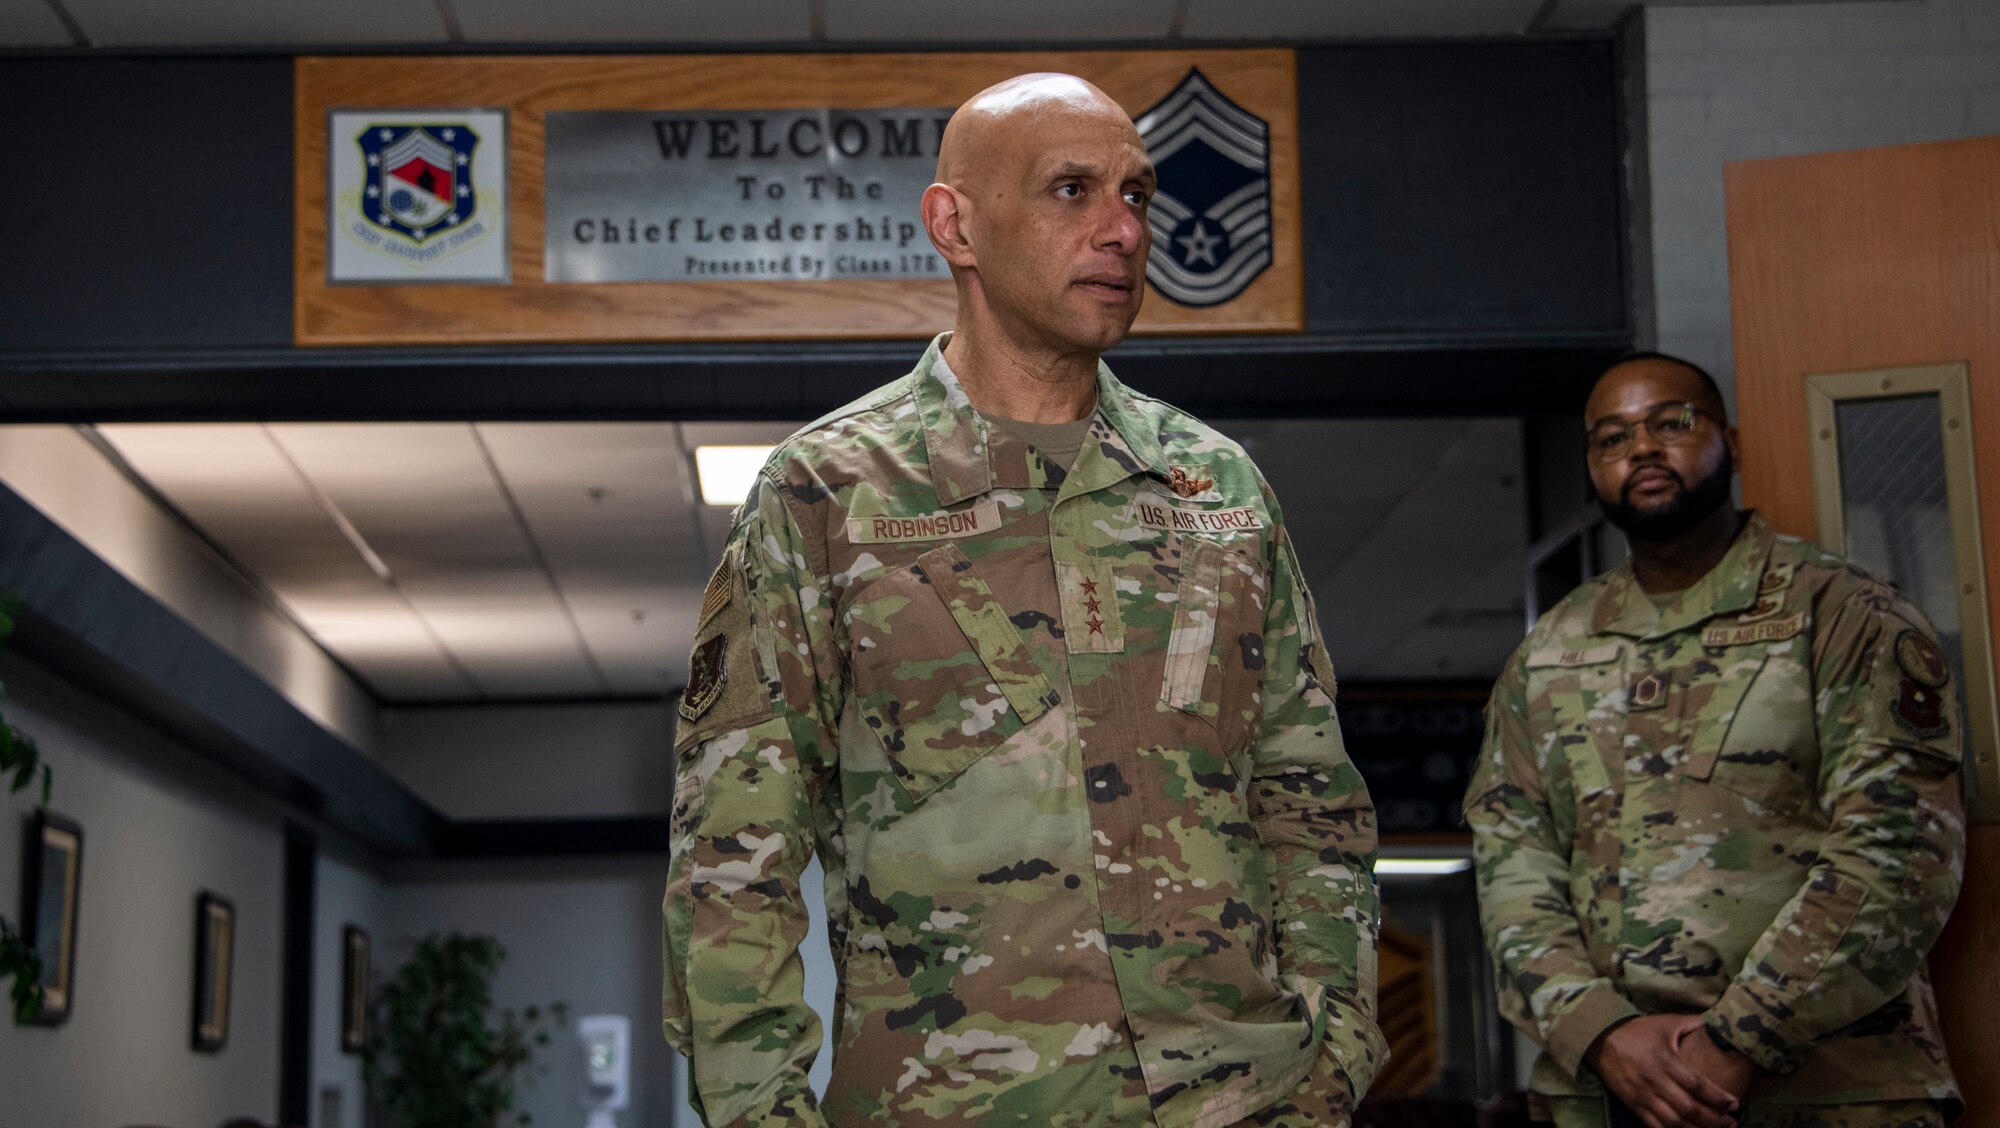 Lt. Gen. Brian Robinson, commander of Air Education and Training Command, tours the Chief Leadership Course building during a visit to Maxwell Air Force Base, Alabama, Feb. 23, 2023. (U.S. Air Force photo by Brian Ferguson)